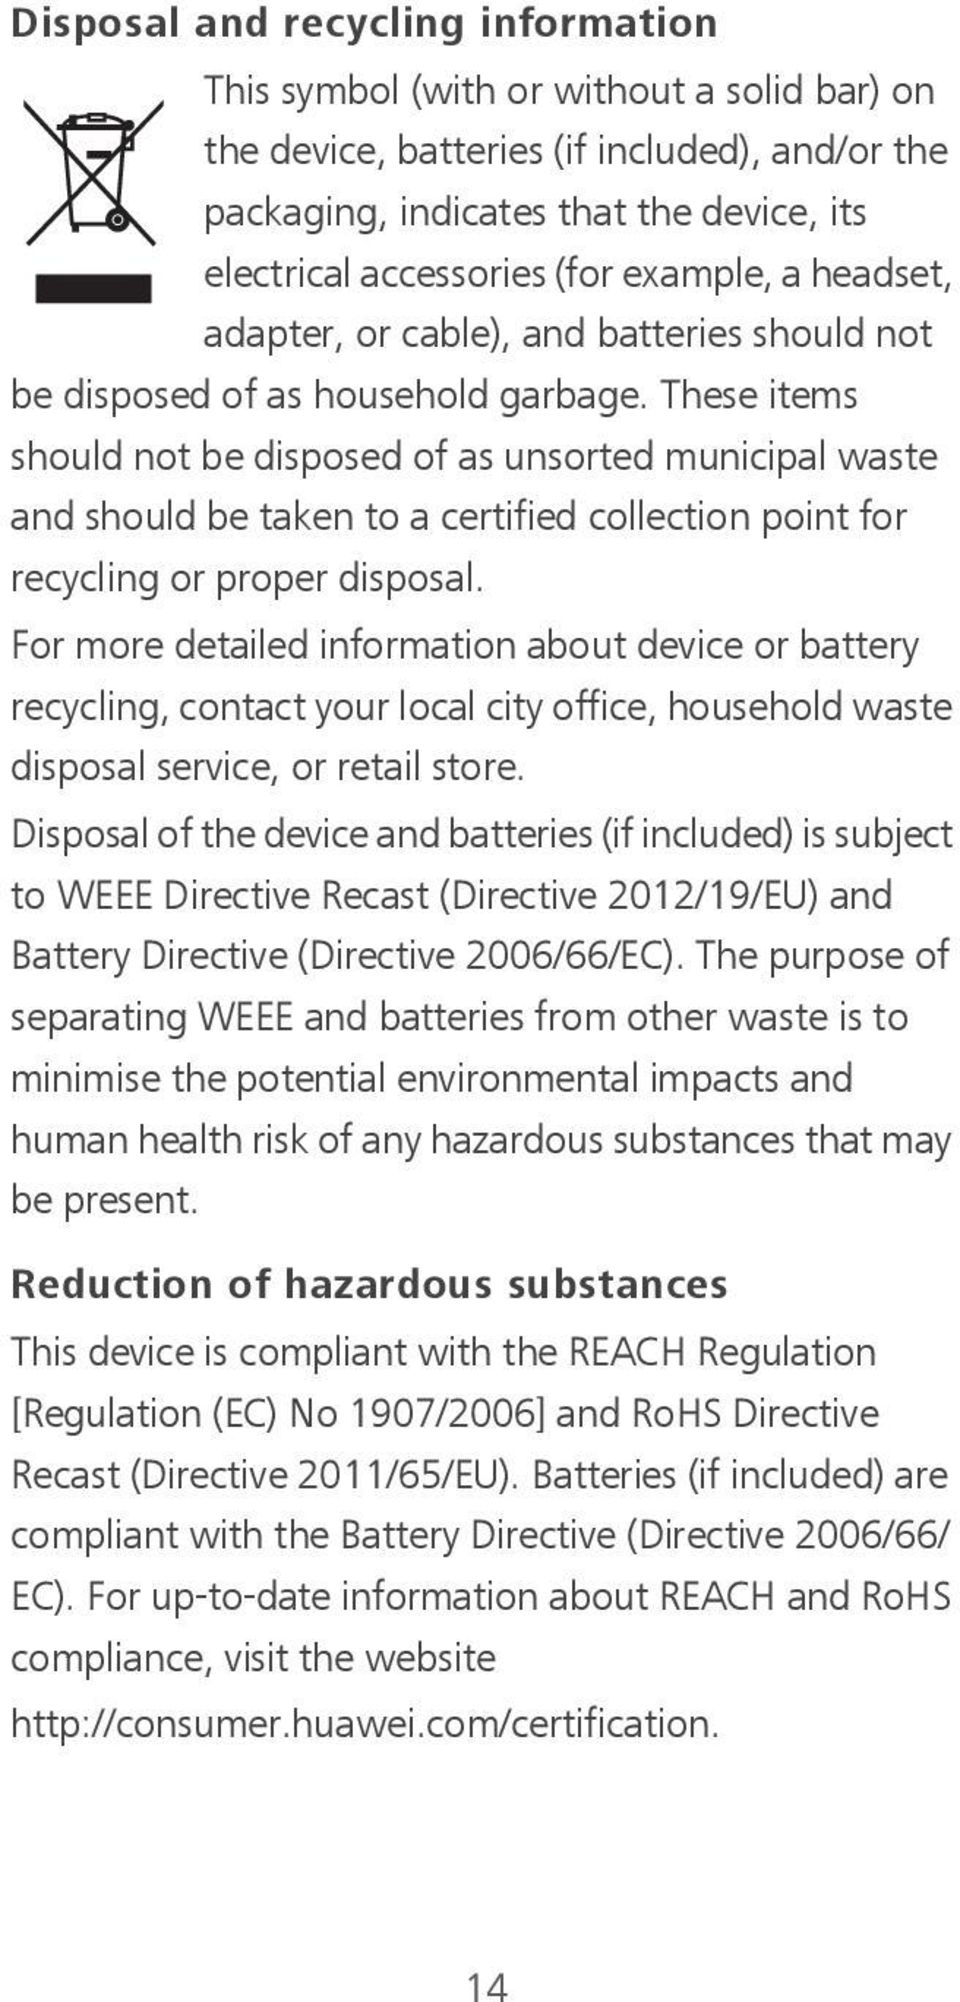 These items should not be disposed of as unsorted municipal waste and should be taken to a certified collection point for recycling or proper disposal.